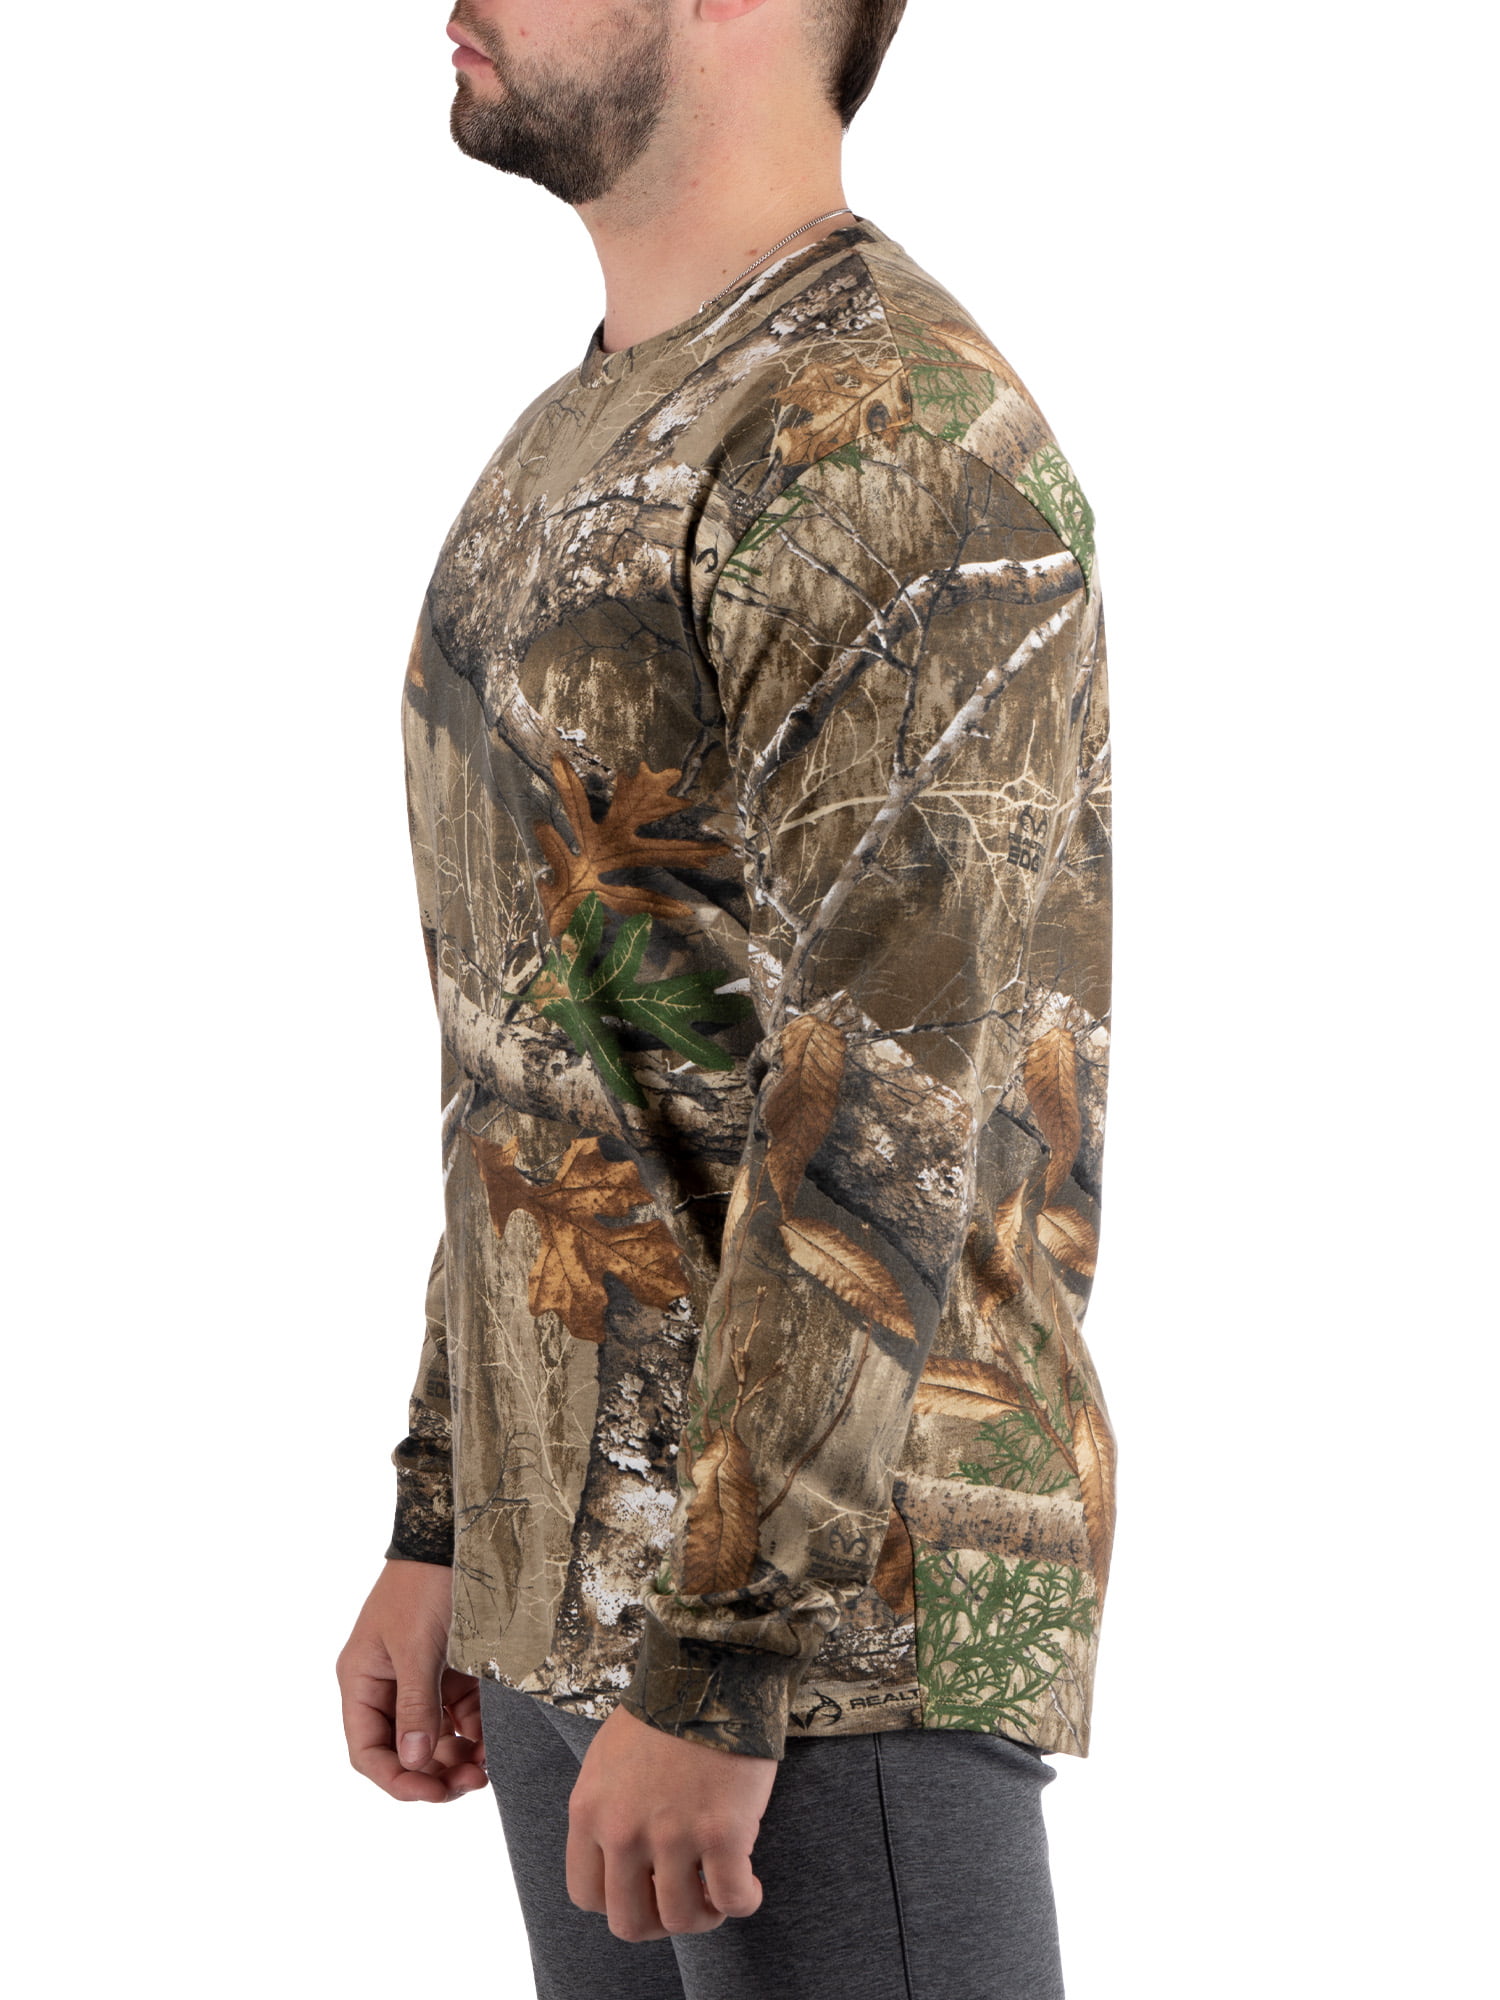 Shirt Camo Tee S-3XL Men\'s Long Cotton by Control Sleeve Sizes Scent Realtree,